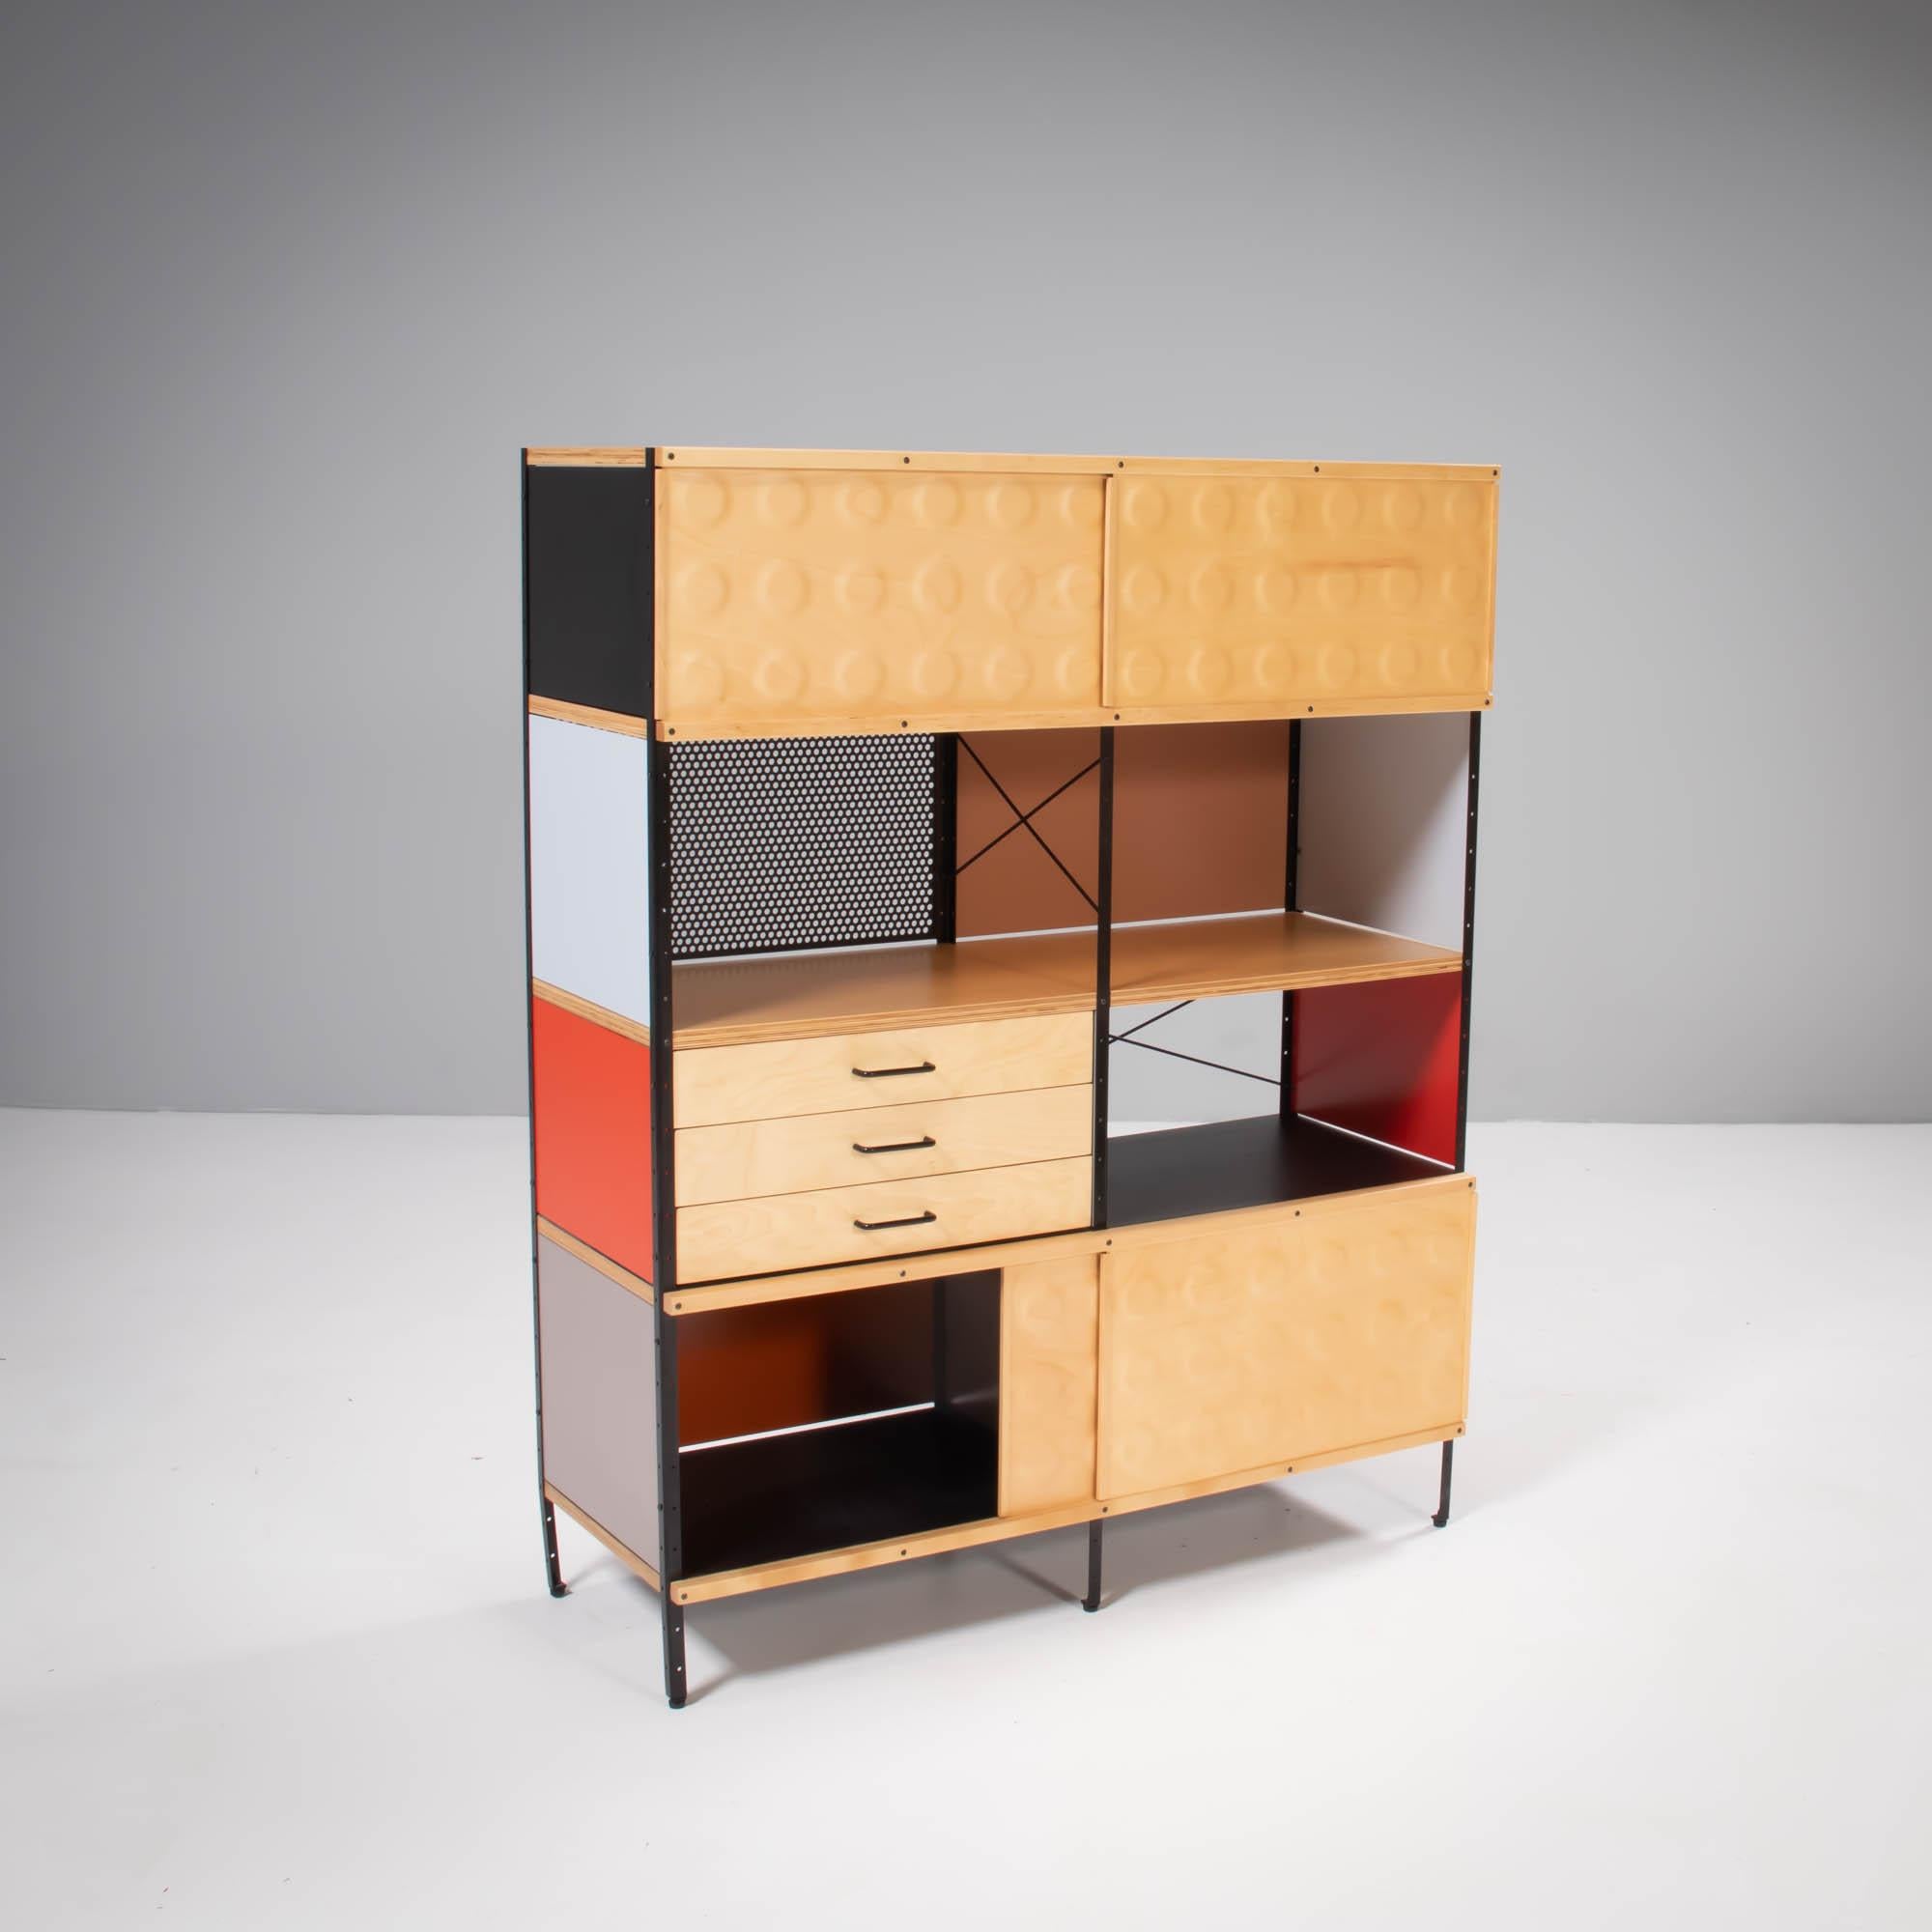 Originally designed by Charles and Ray Eames in 1949 and manufactured by Herman Miller between 1950-1955, the Eames Storage Unit was brought back into production in the 1990s.

The Modular storage unit has an industrial aesthetic, constructed from